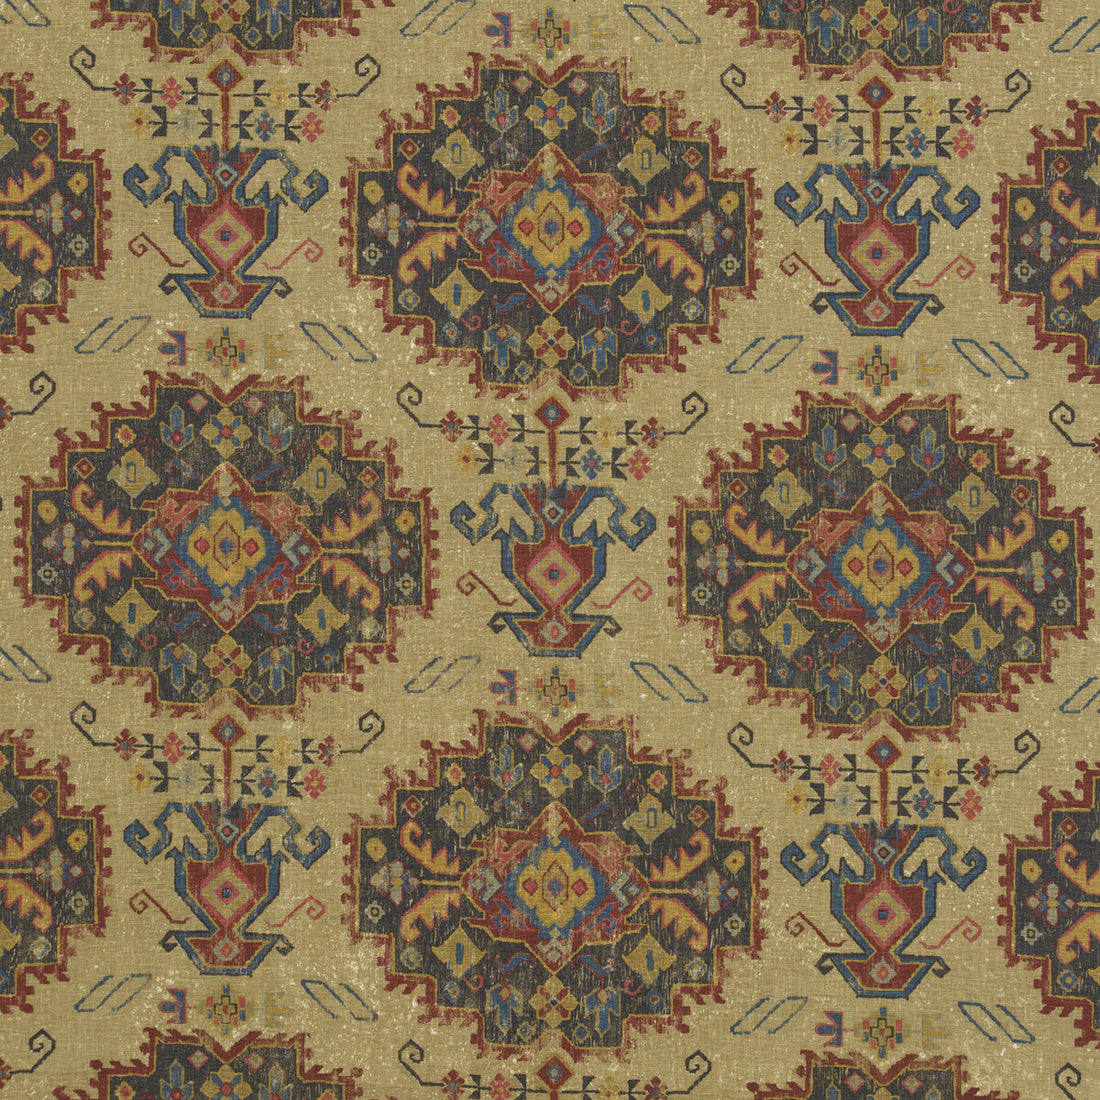 Samarkand fabric in spice color - pattern BP10718.1.0 - by G P &amp; J Baker in the East To West collection